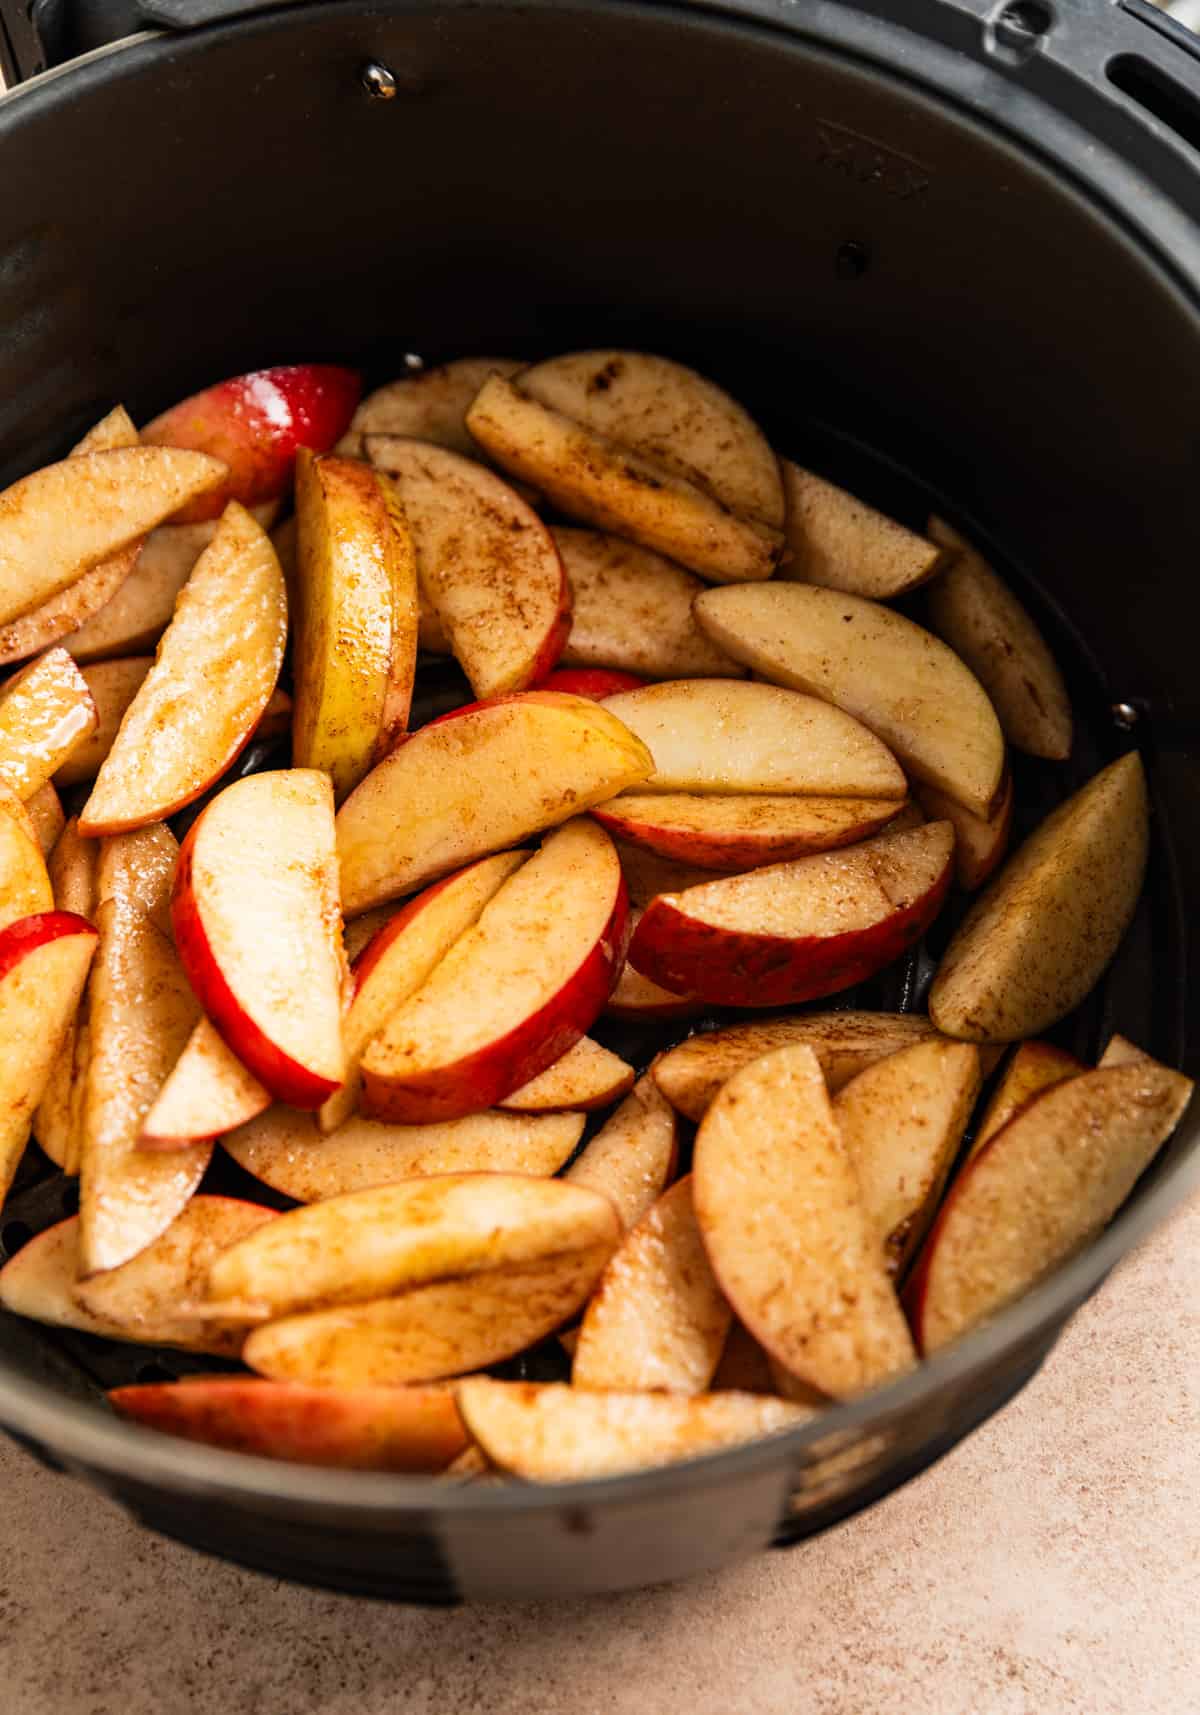 Air fryer basket with sliced apples tossed in oil and cinnamon before cooking.